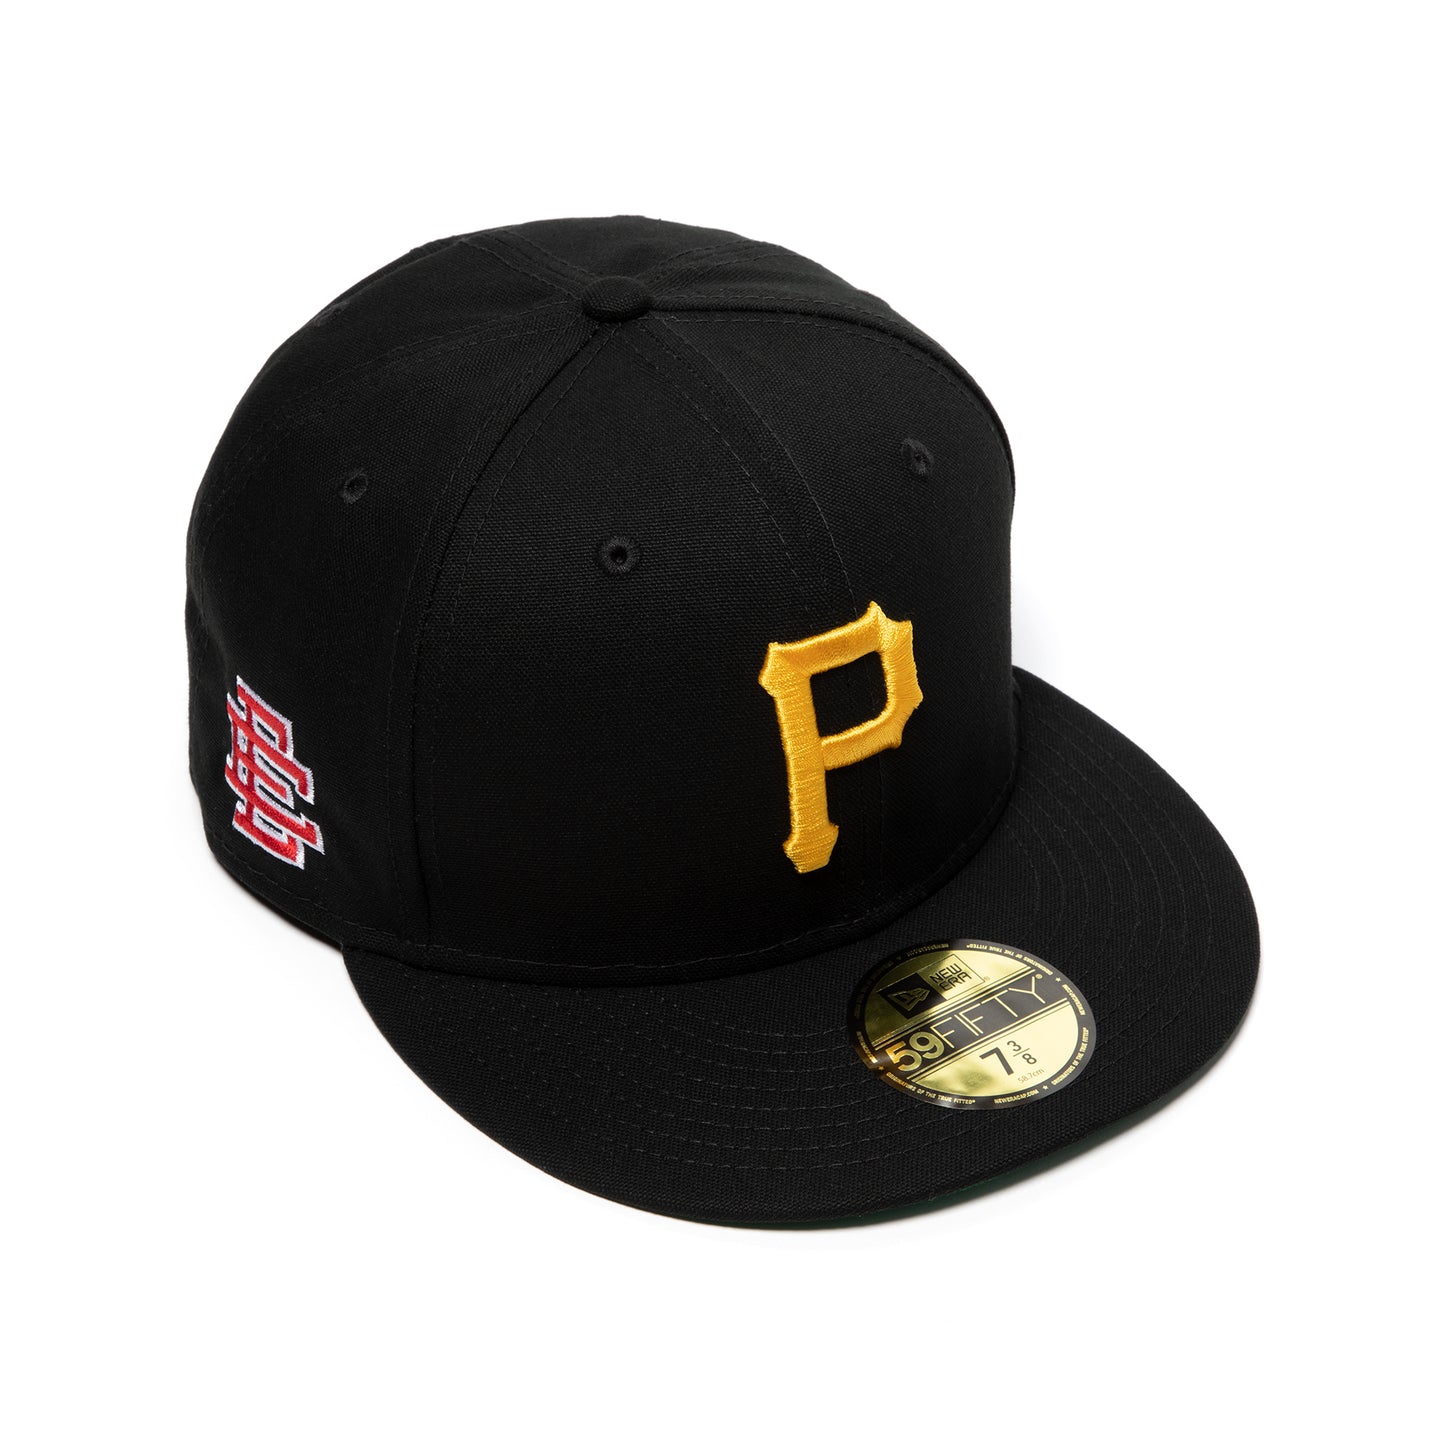 New Era x Eric Emanuel Pittsburgh Pirates Fitted Hat (Black)